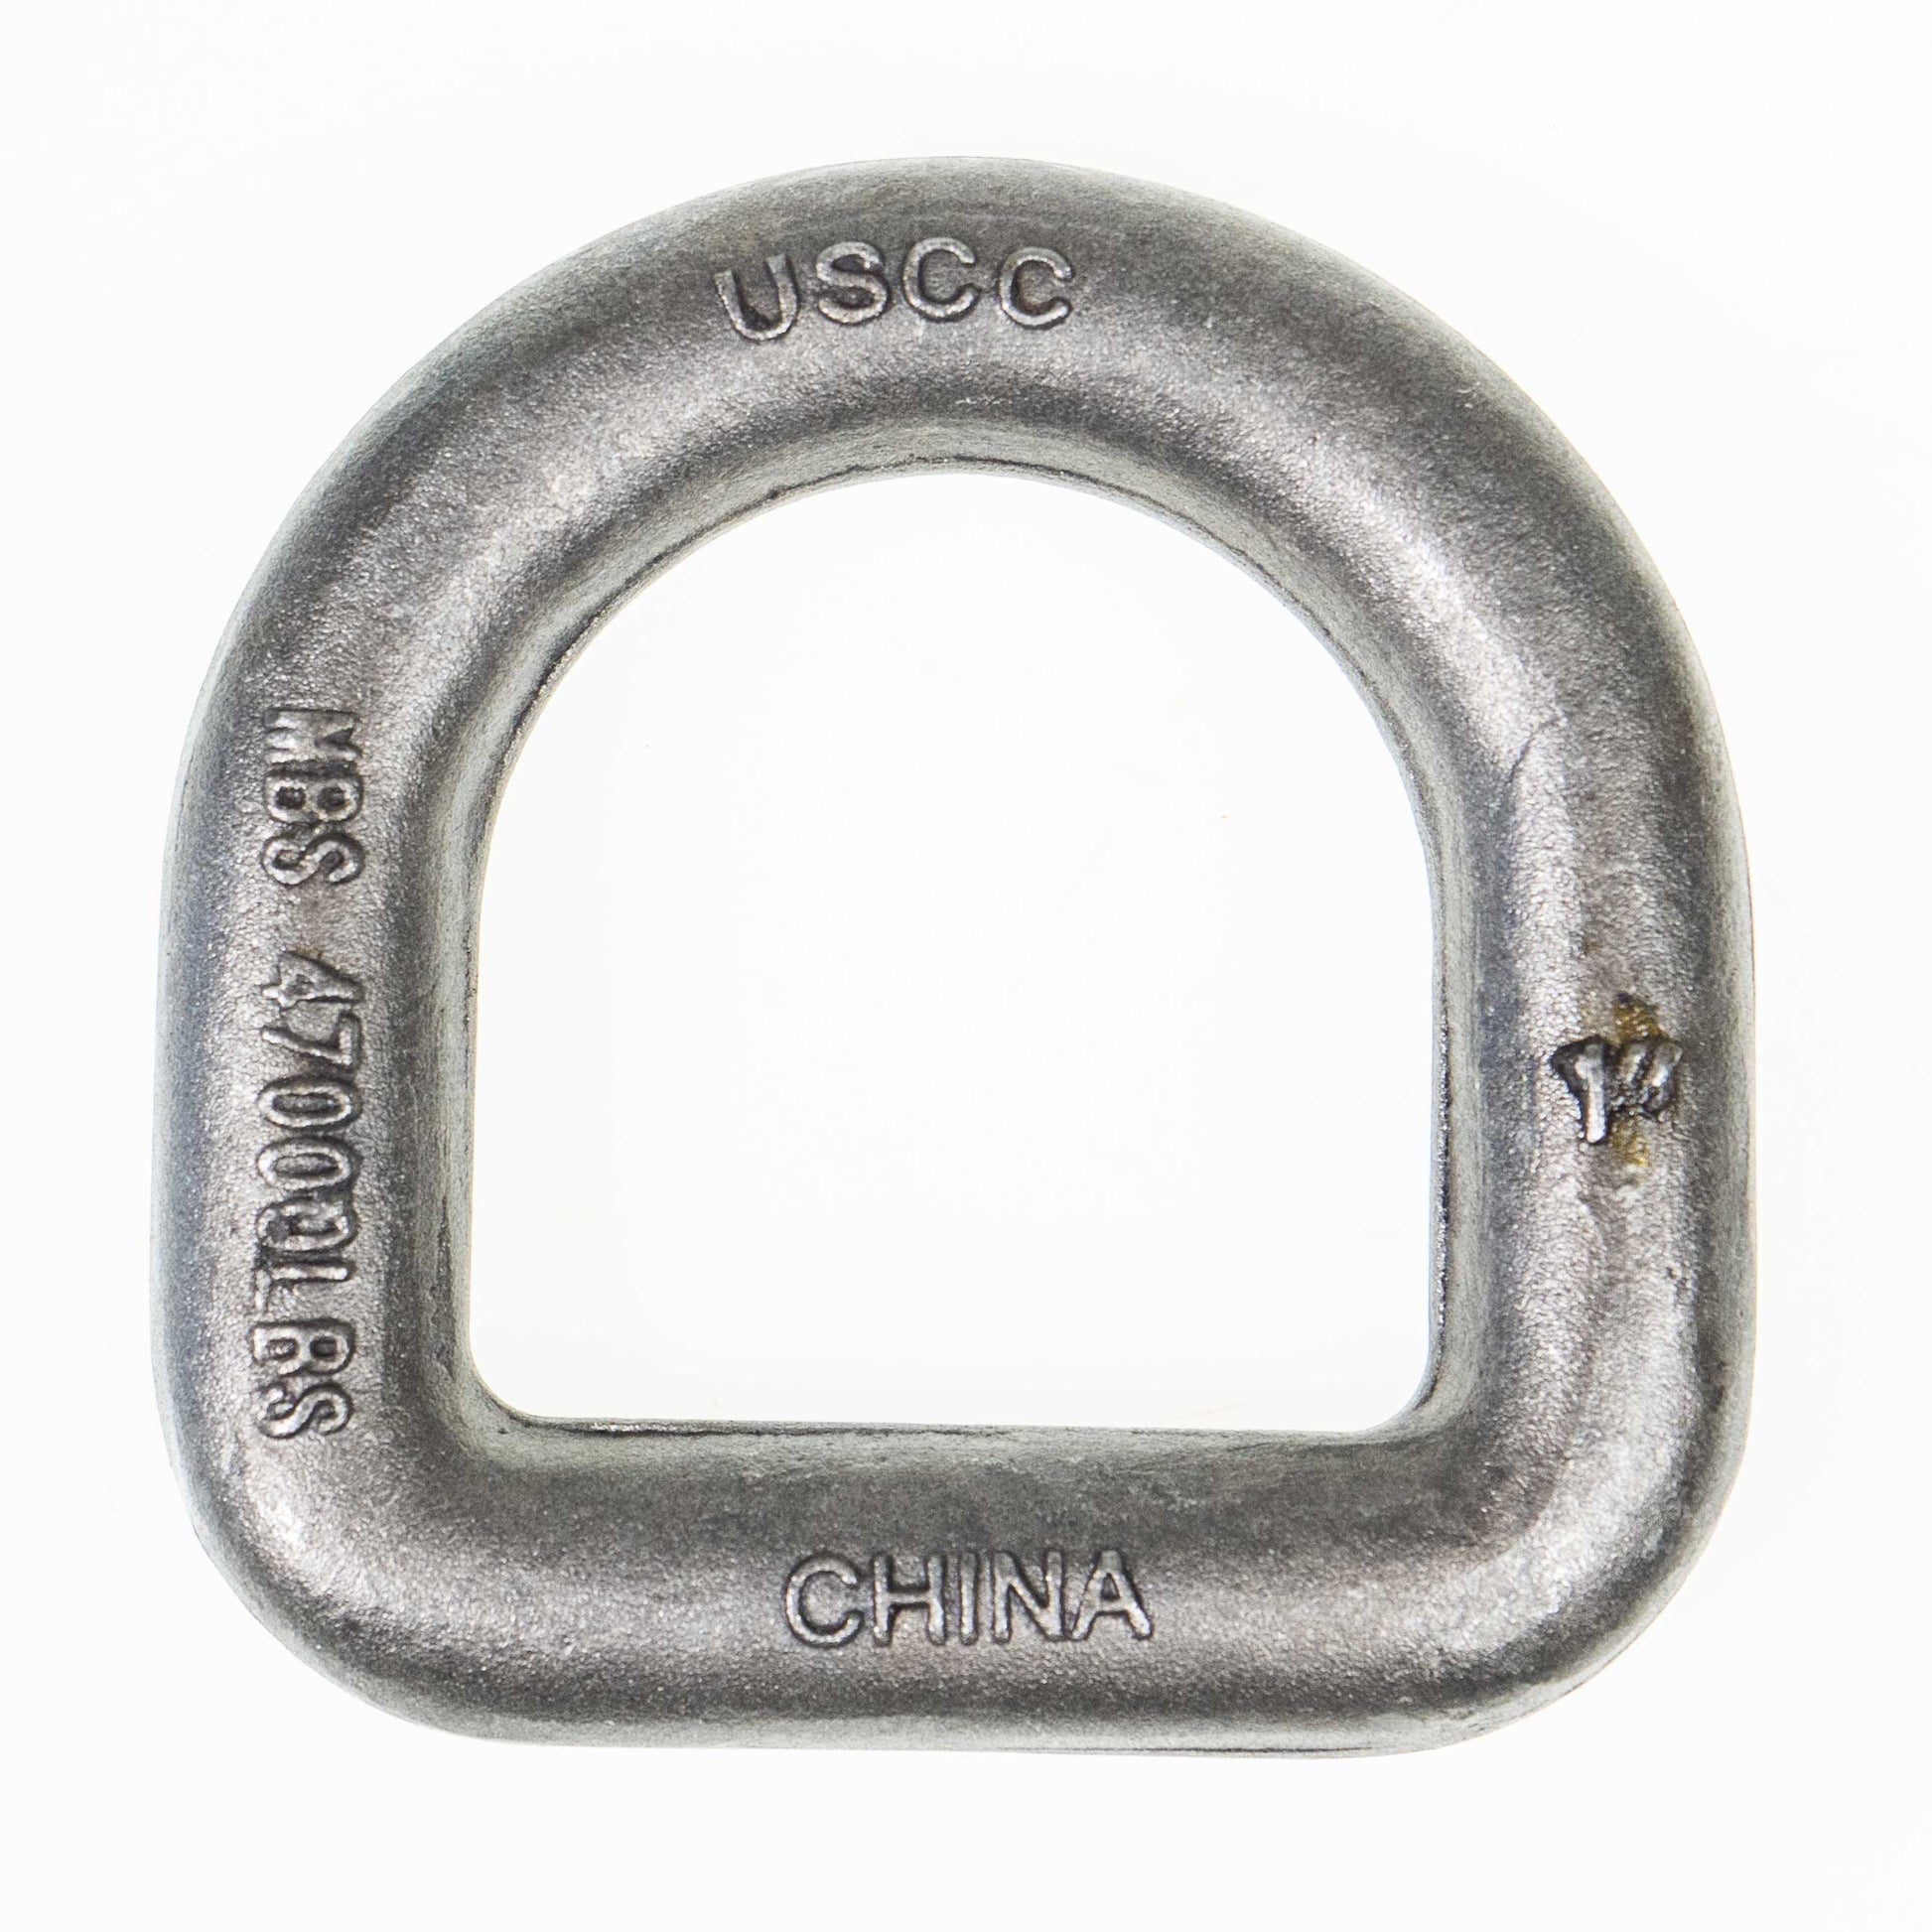 Heavy Duty D-Rings with Weld-On Clip